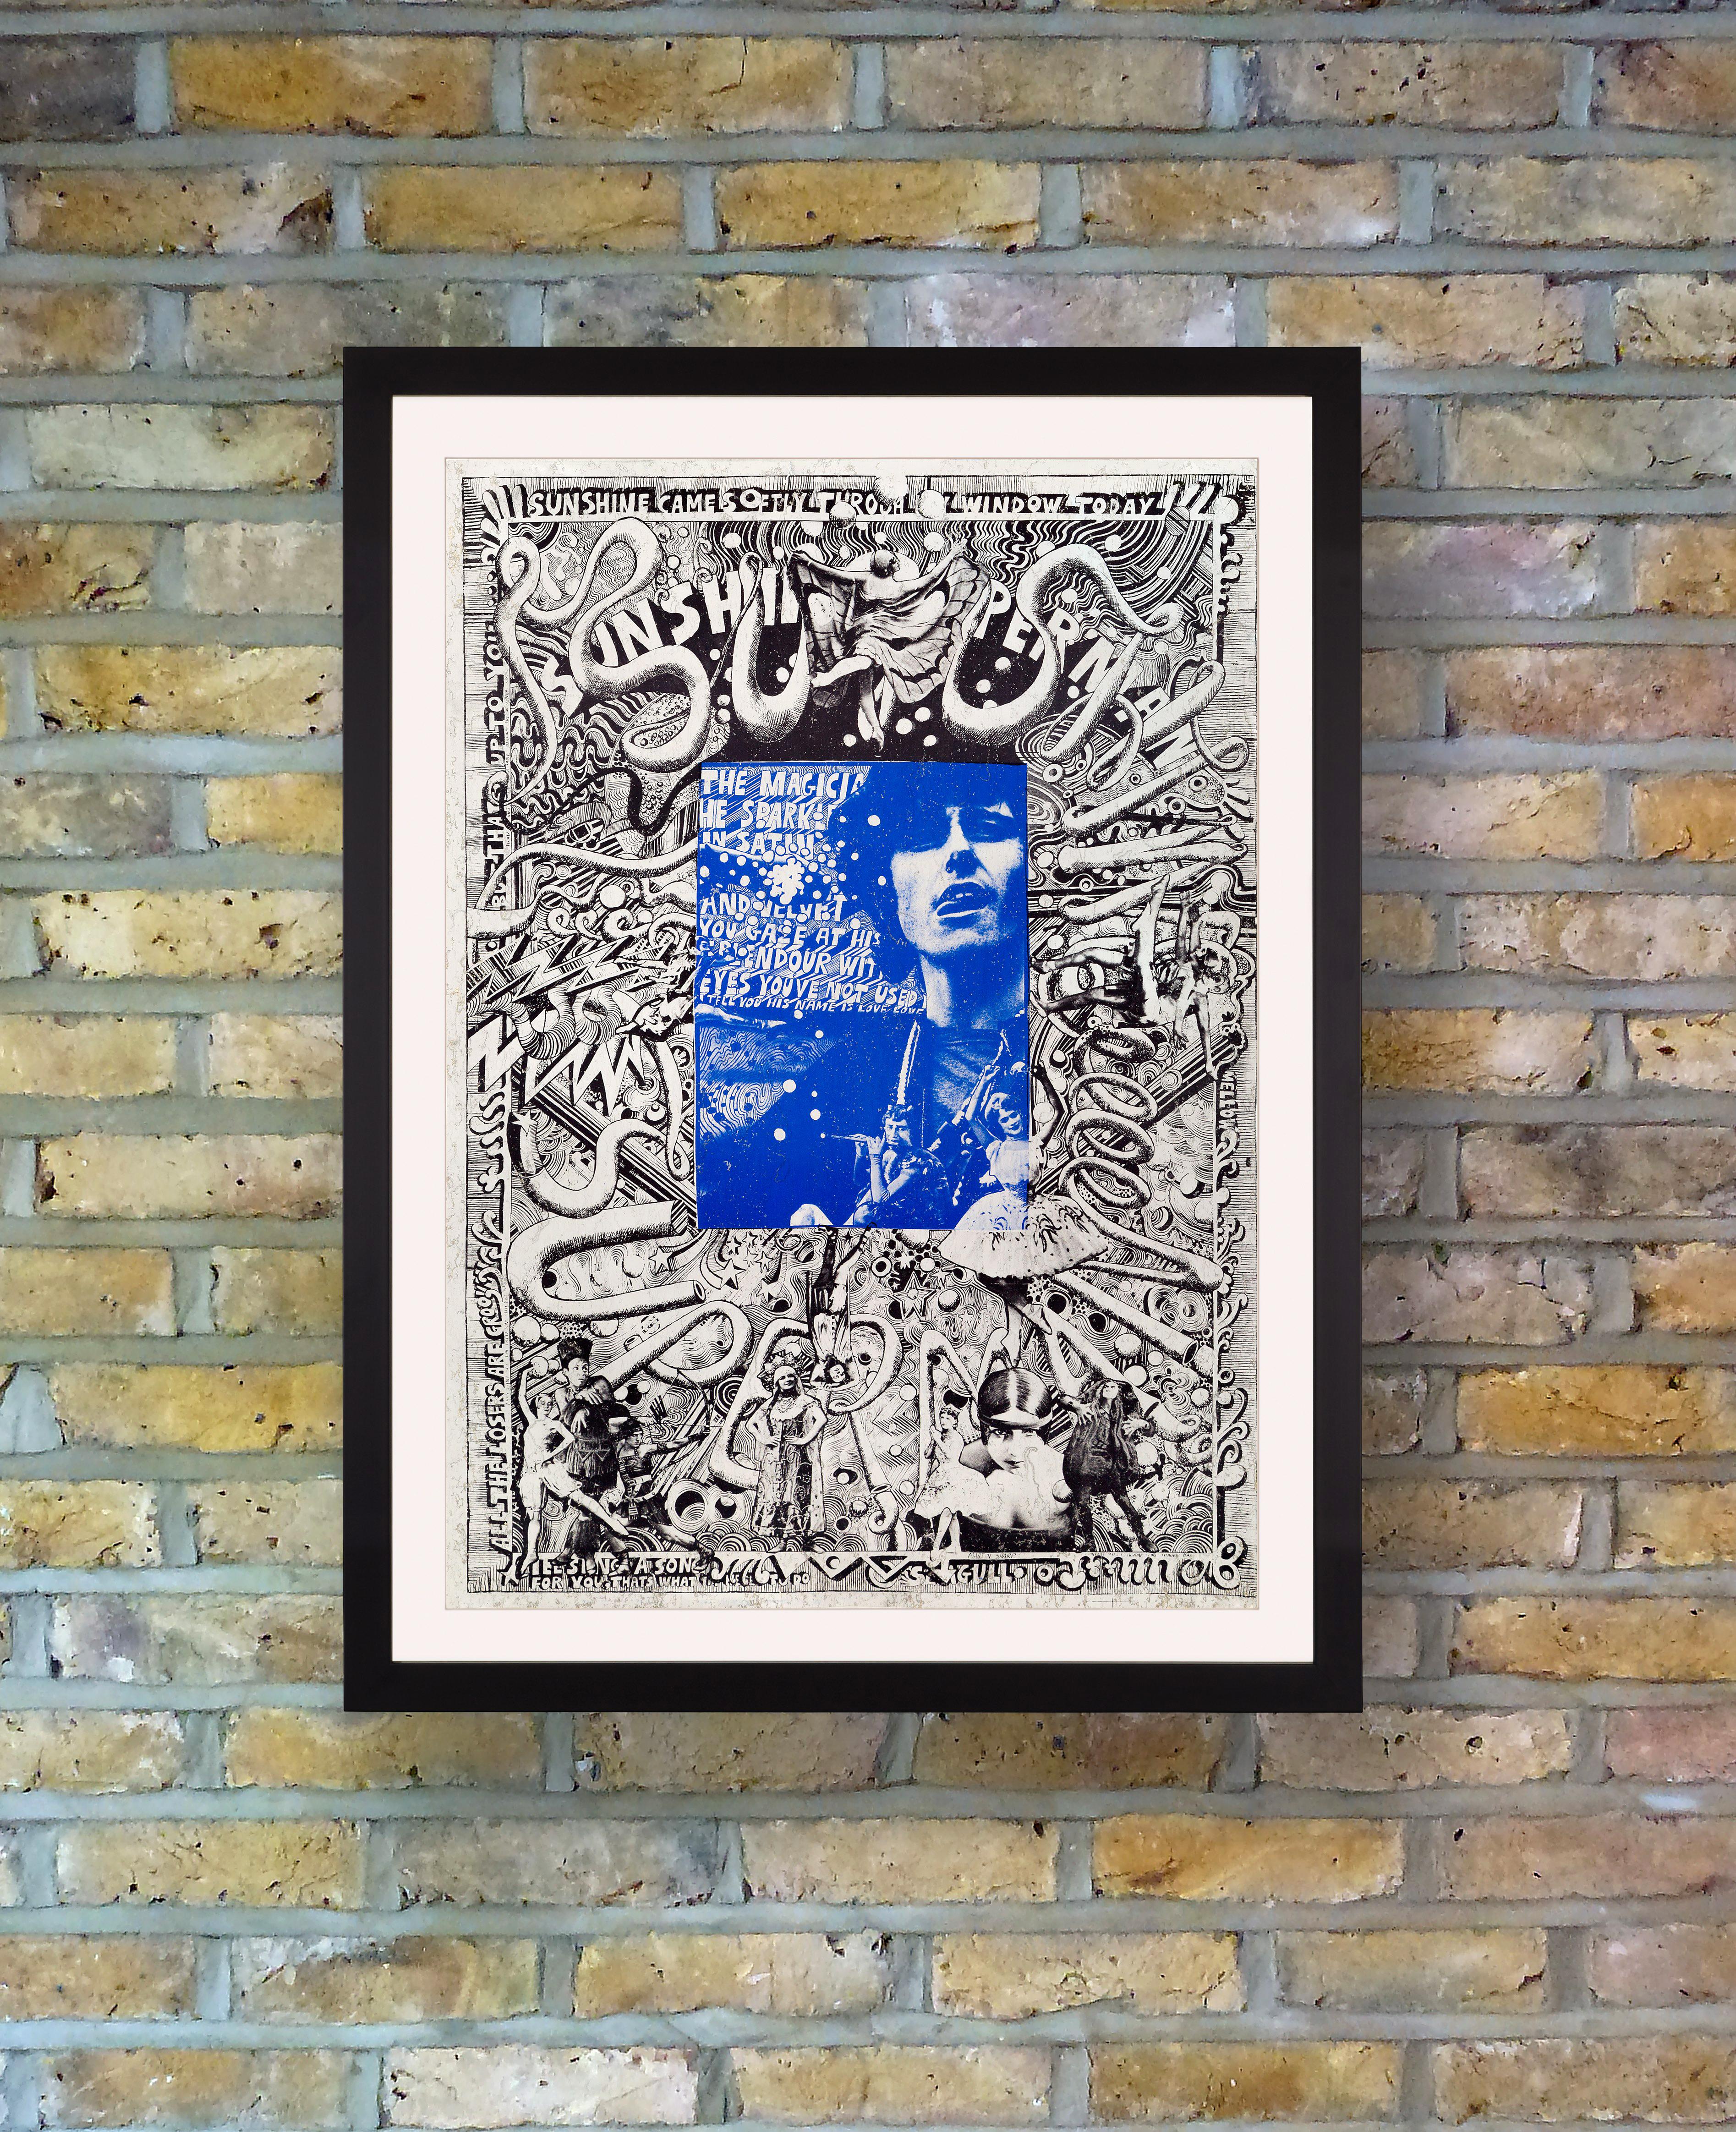 Regarded as one of the Classic British psychedelic posters of the late 1960s, Martin Sharp's tribute to British singer songwriter Donovan captures the spirit of the Summer of Love in swinging London. The Australian born artist and co-founder of